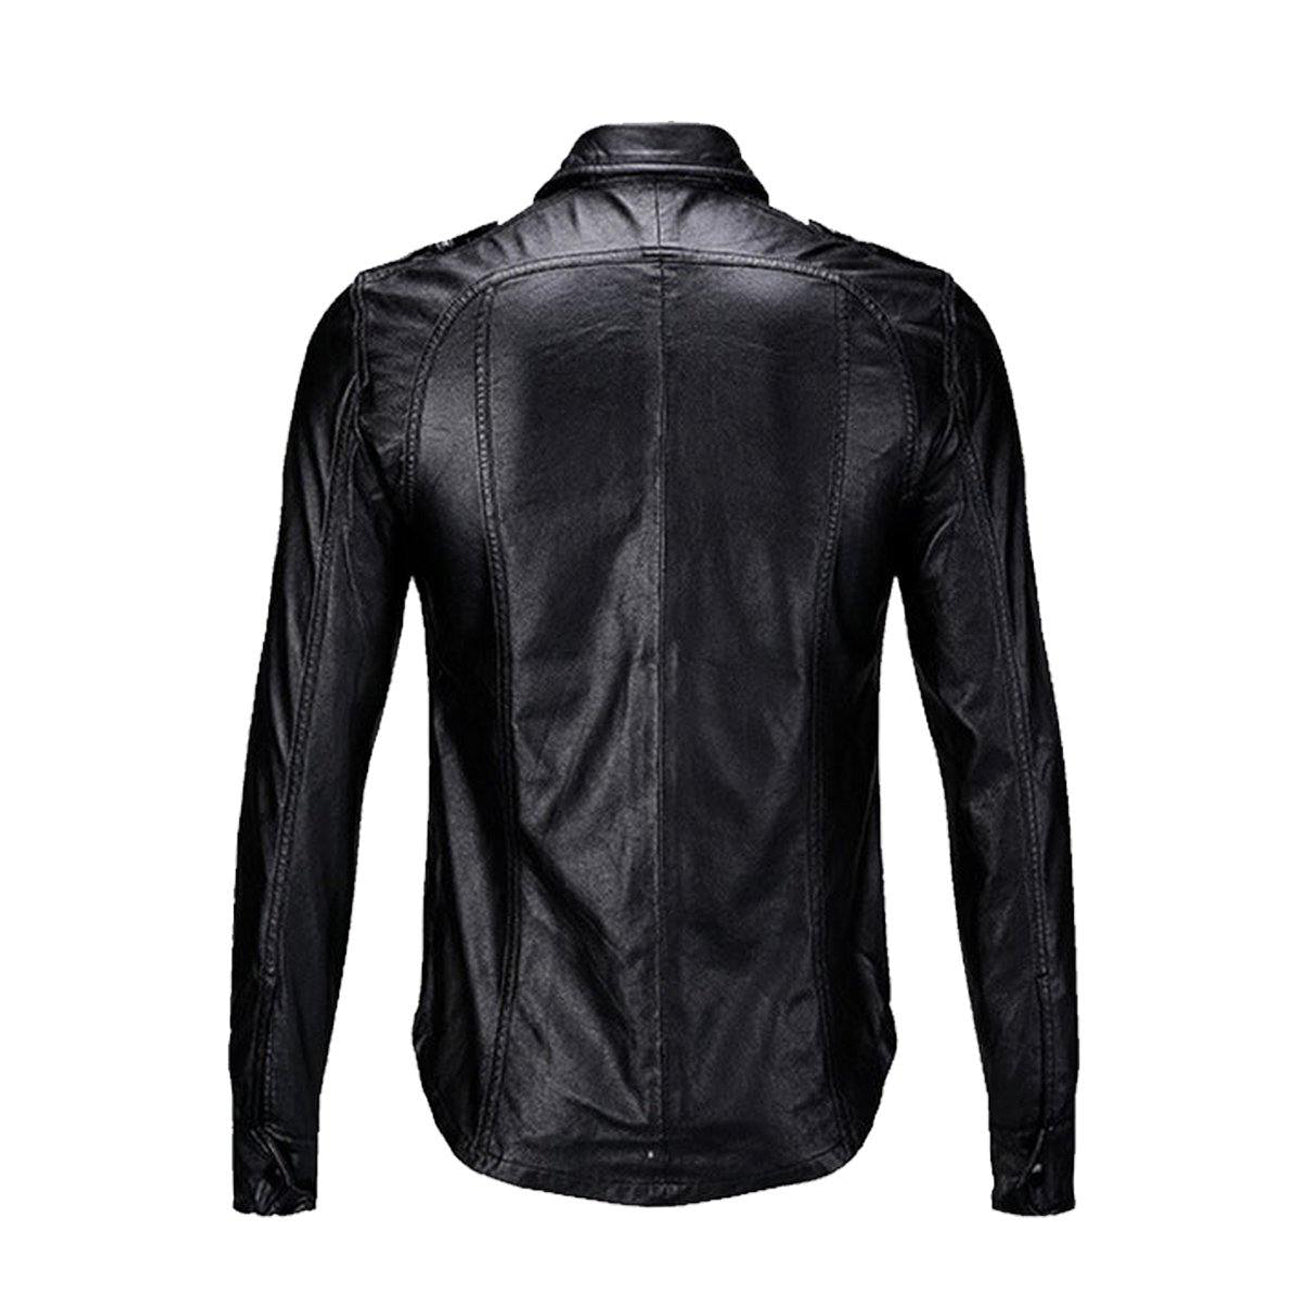 10% off Mens Real Leather shirts